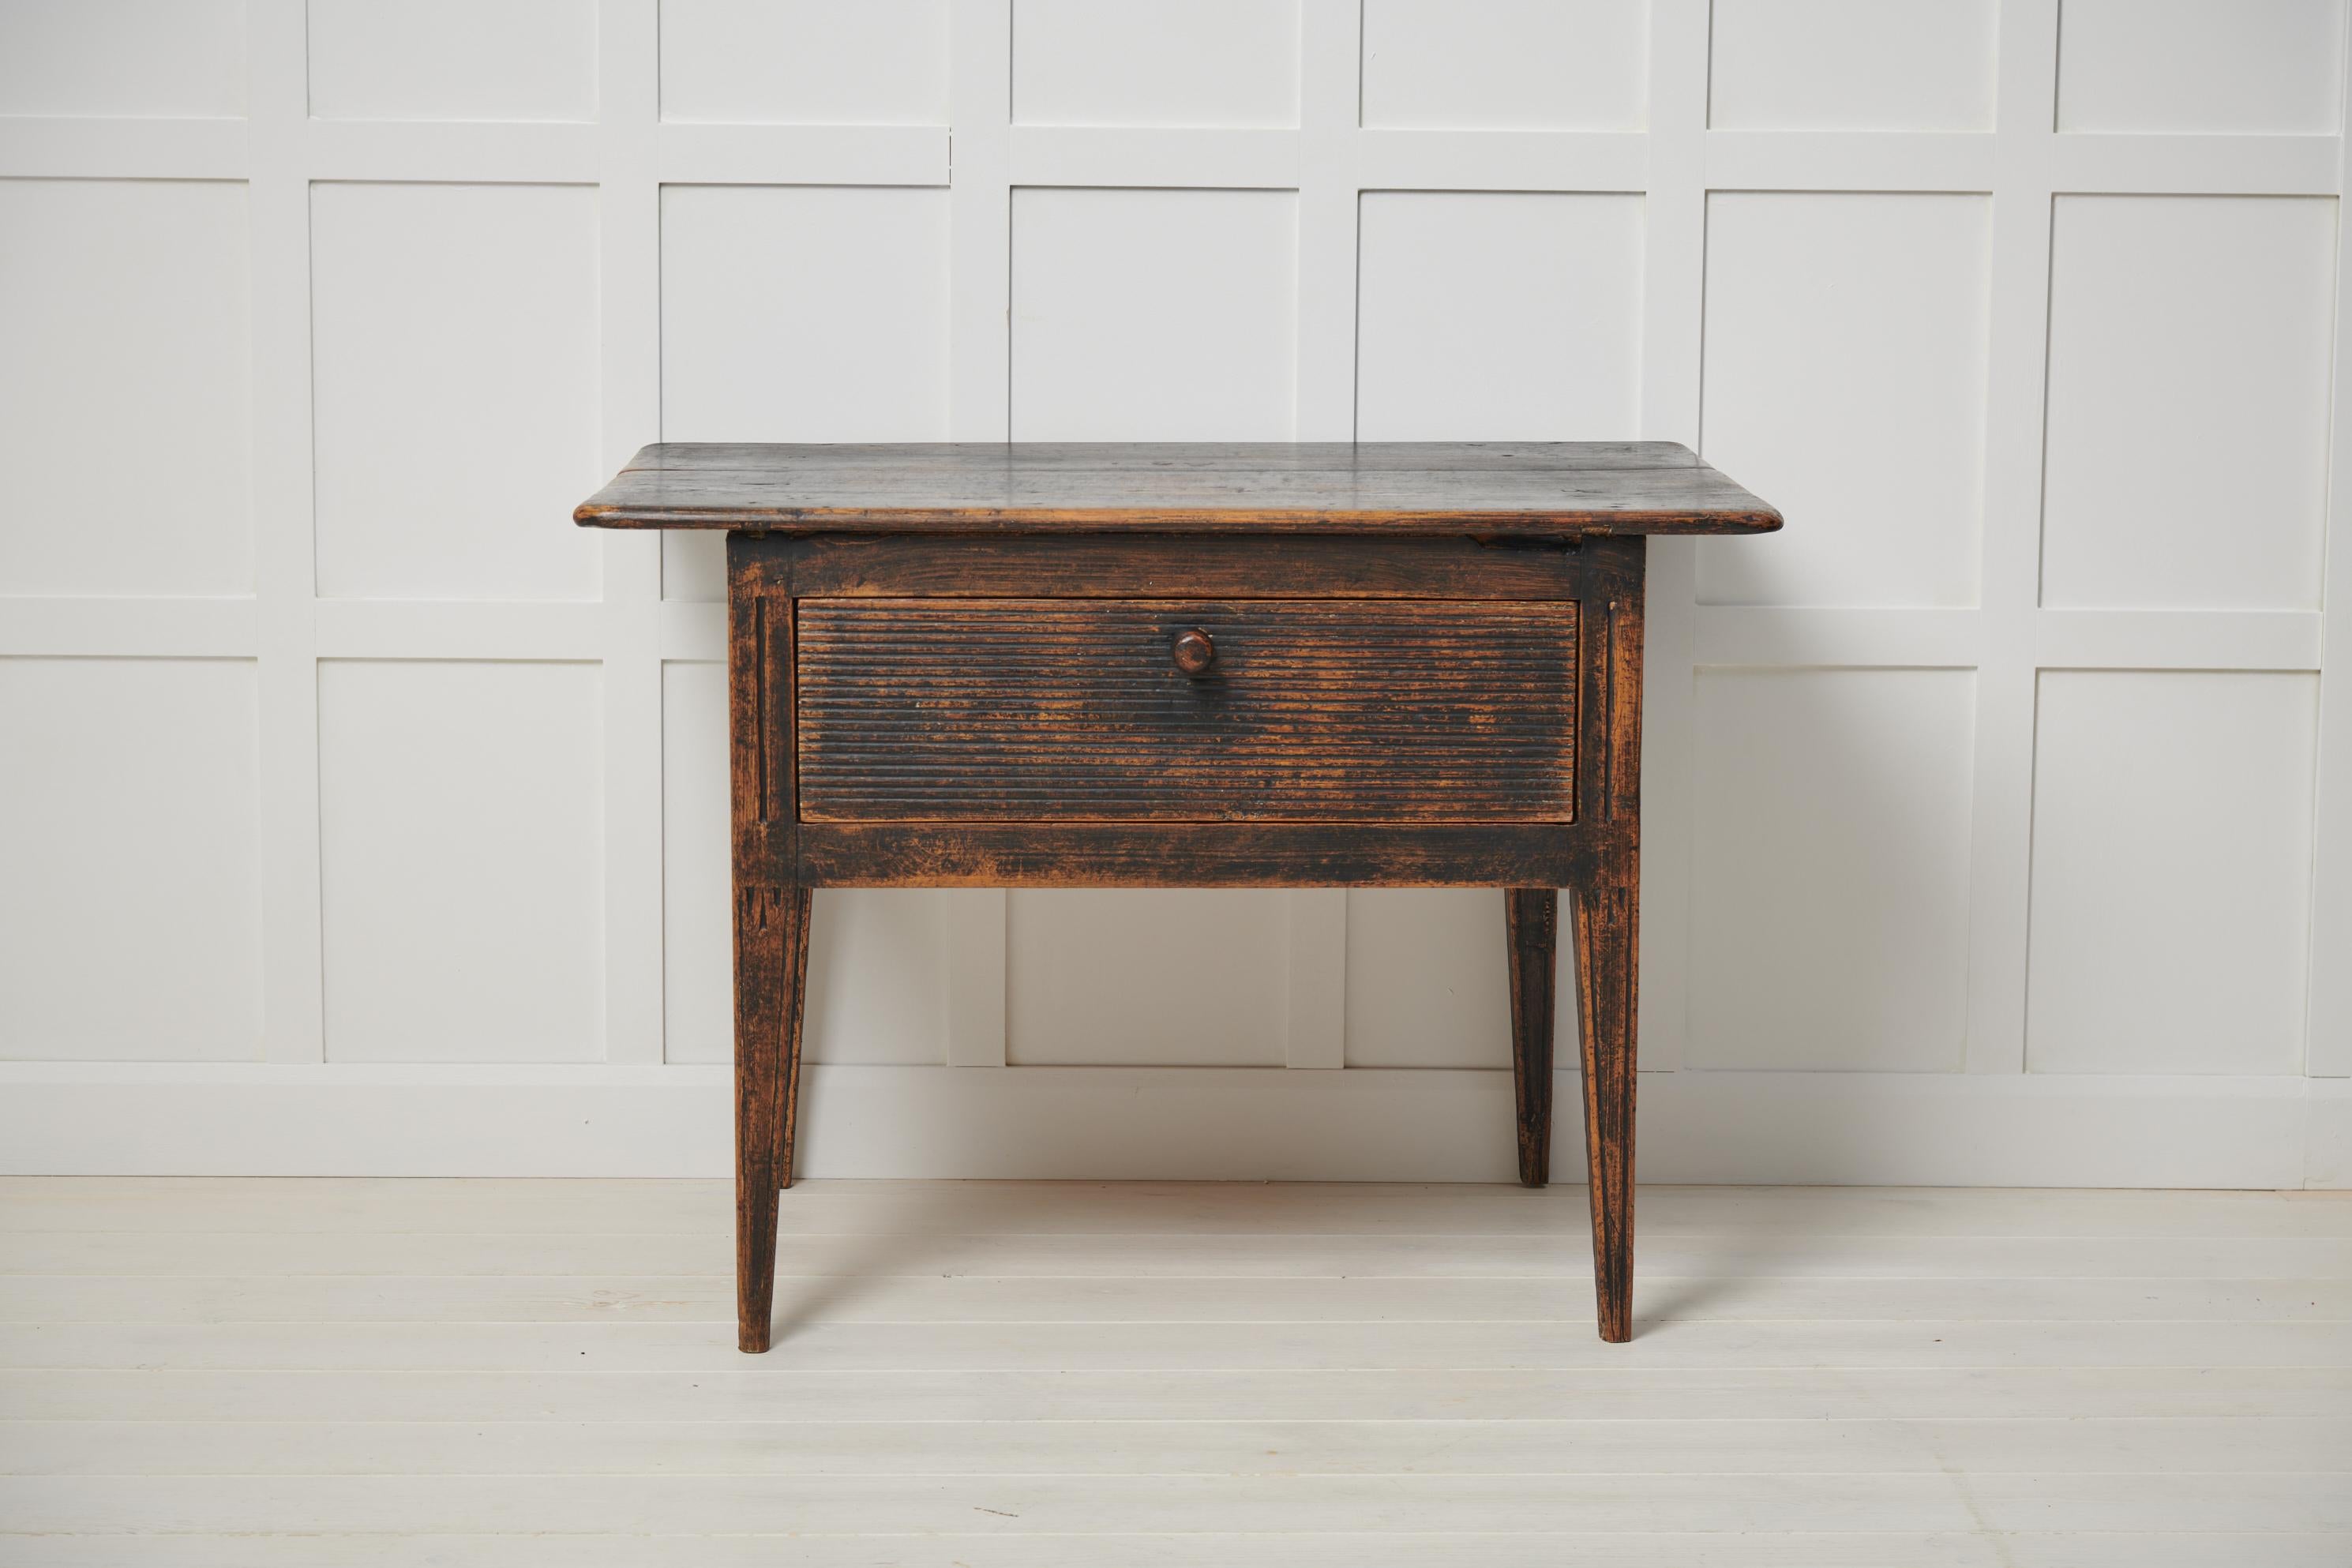 Genuine Swedish antique table in folk art from northern Sweden. The table is made by hand around 1840 from solid painted pine. The table has a large drawer with the original fluted front. Today it would work well as a coffee table or side table. The